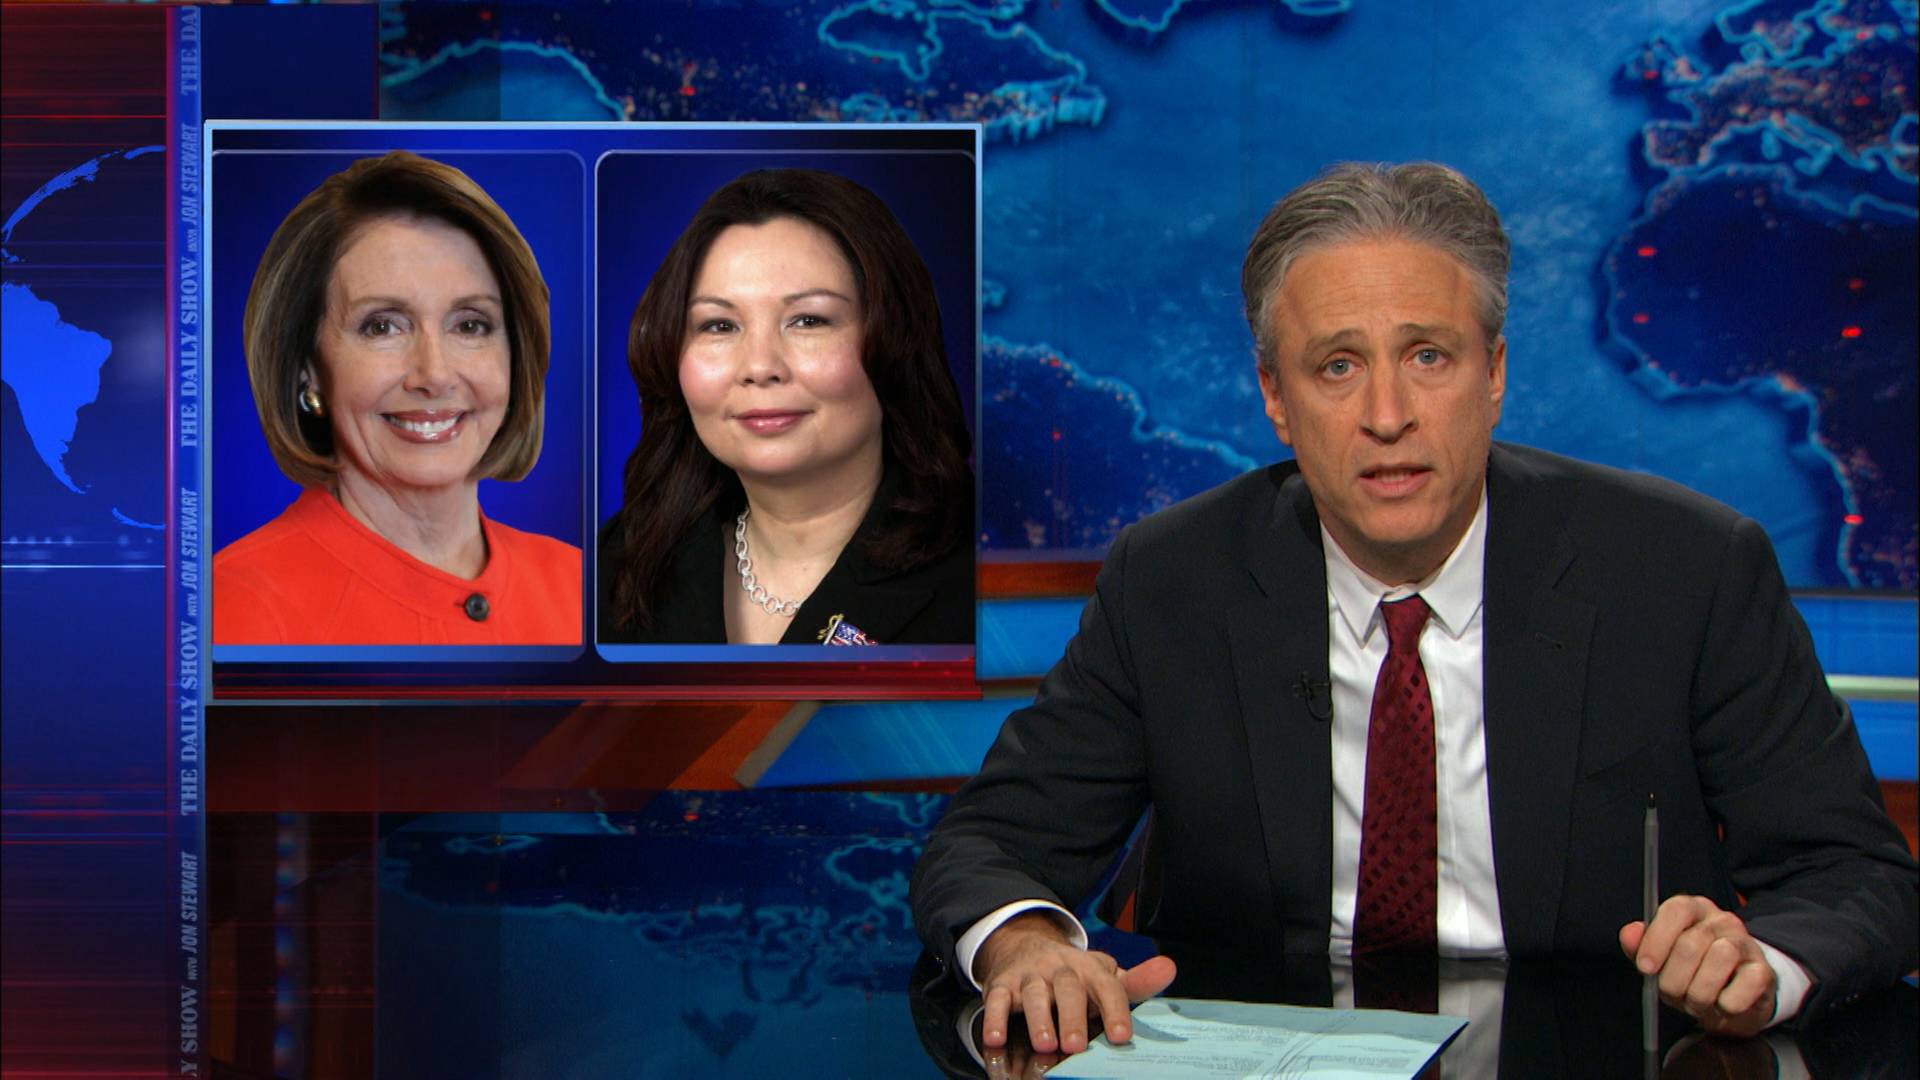 Porks and Habitation - The Daily Show with Jon Stewart (Video Clip